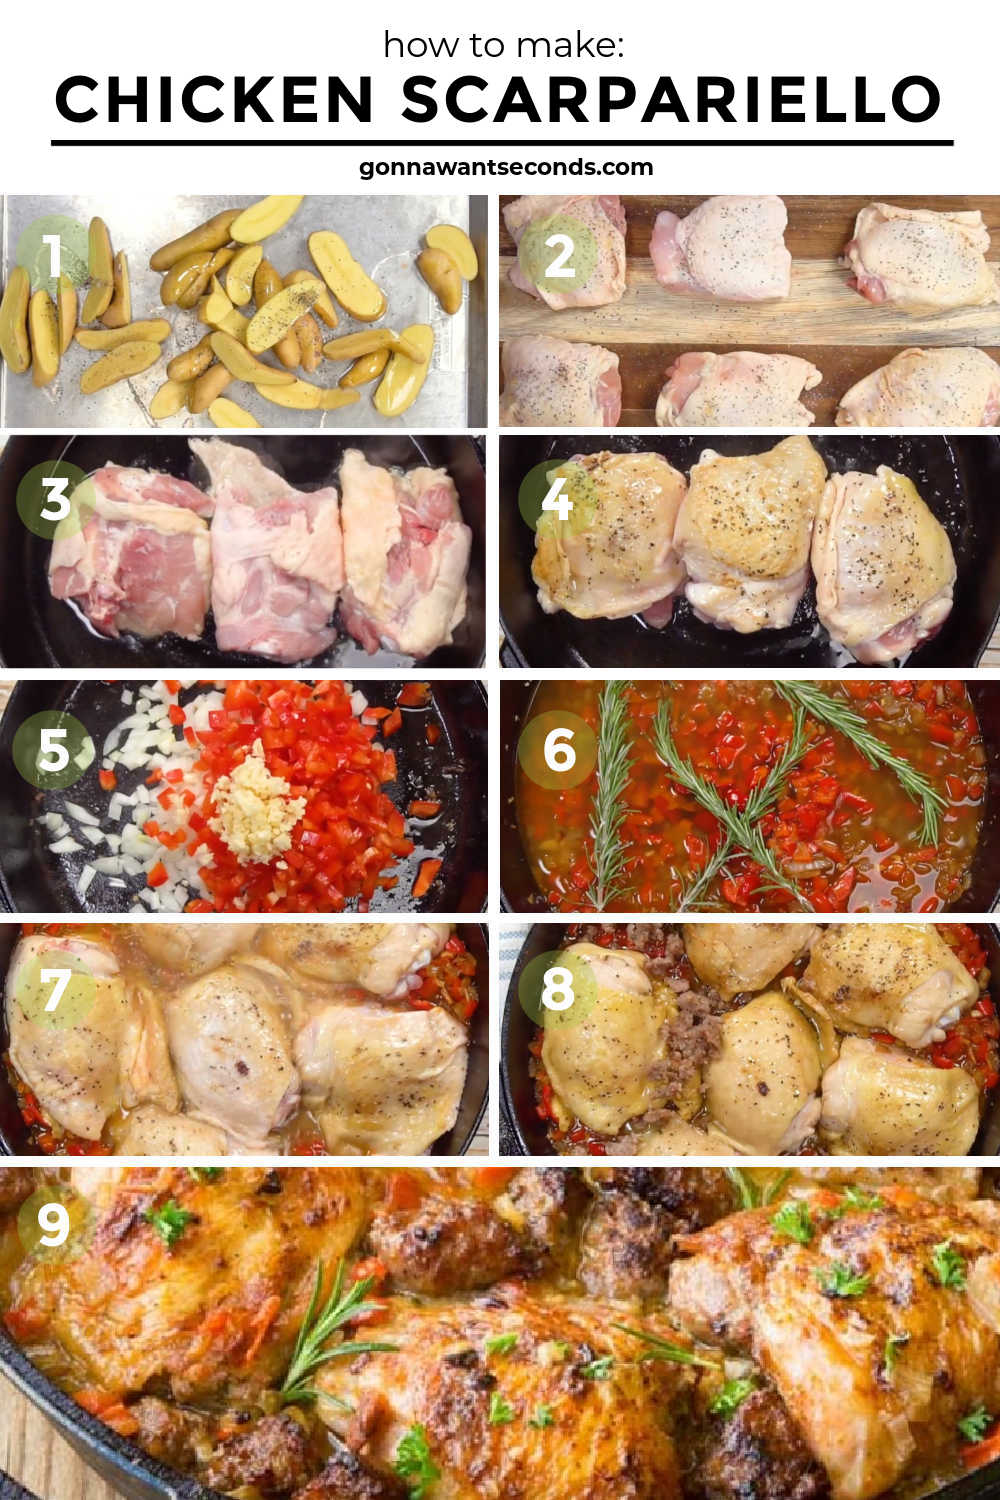 Step by step how to make chicken scarpariello